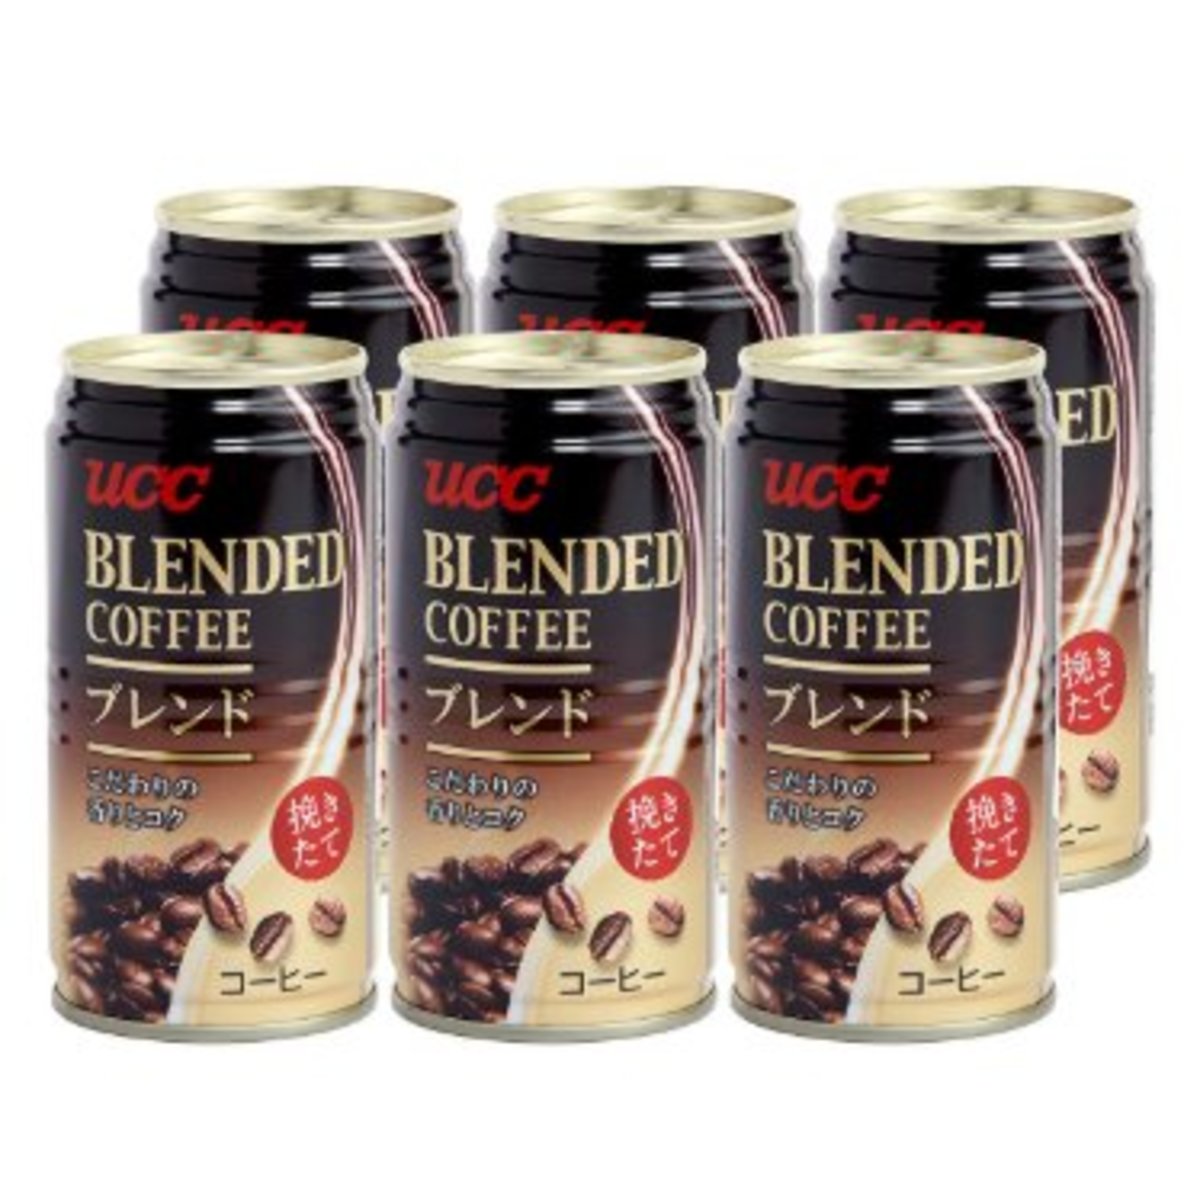 Ucc | Blended Coffee x6 cans | HKTVmall The Largest HK Shopping Platform